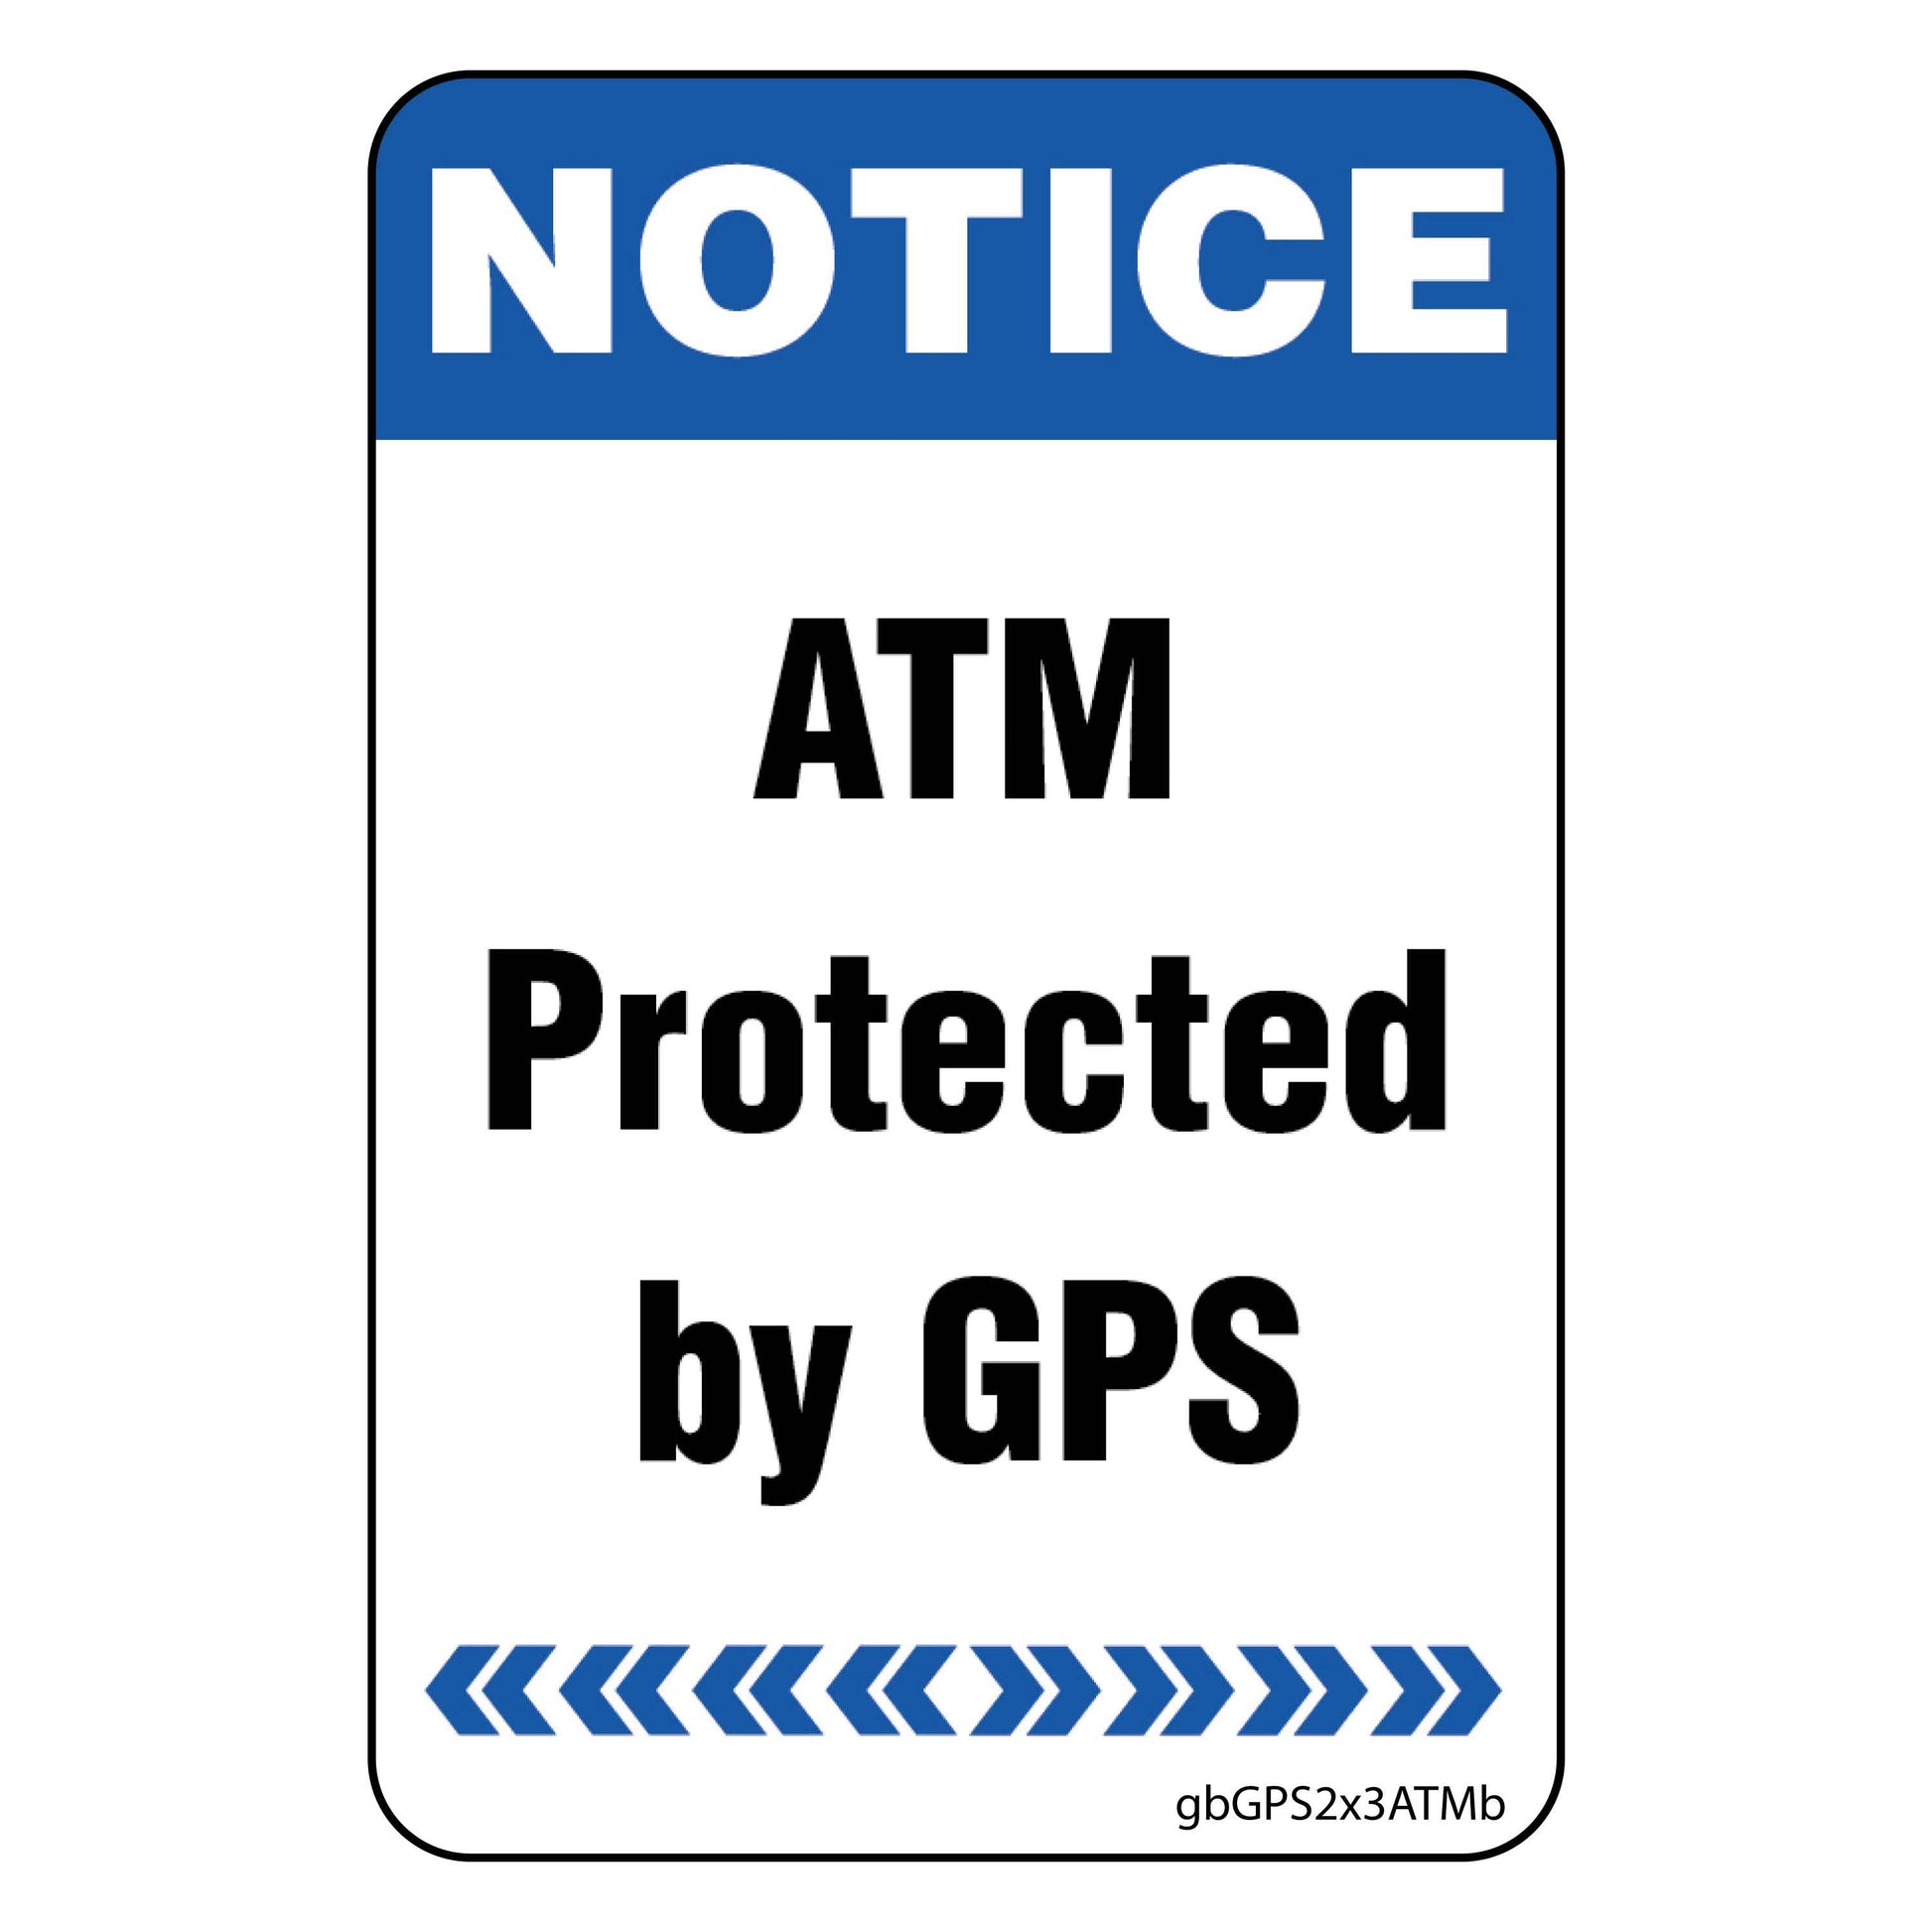 ATM Protected by GPS Decal, Blue. 2 inches by 3 inches in size.